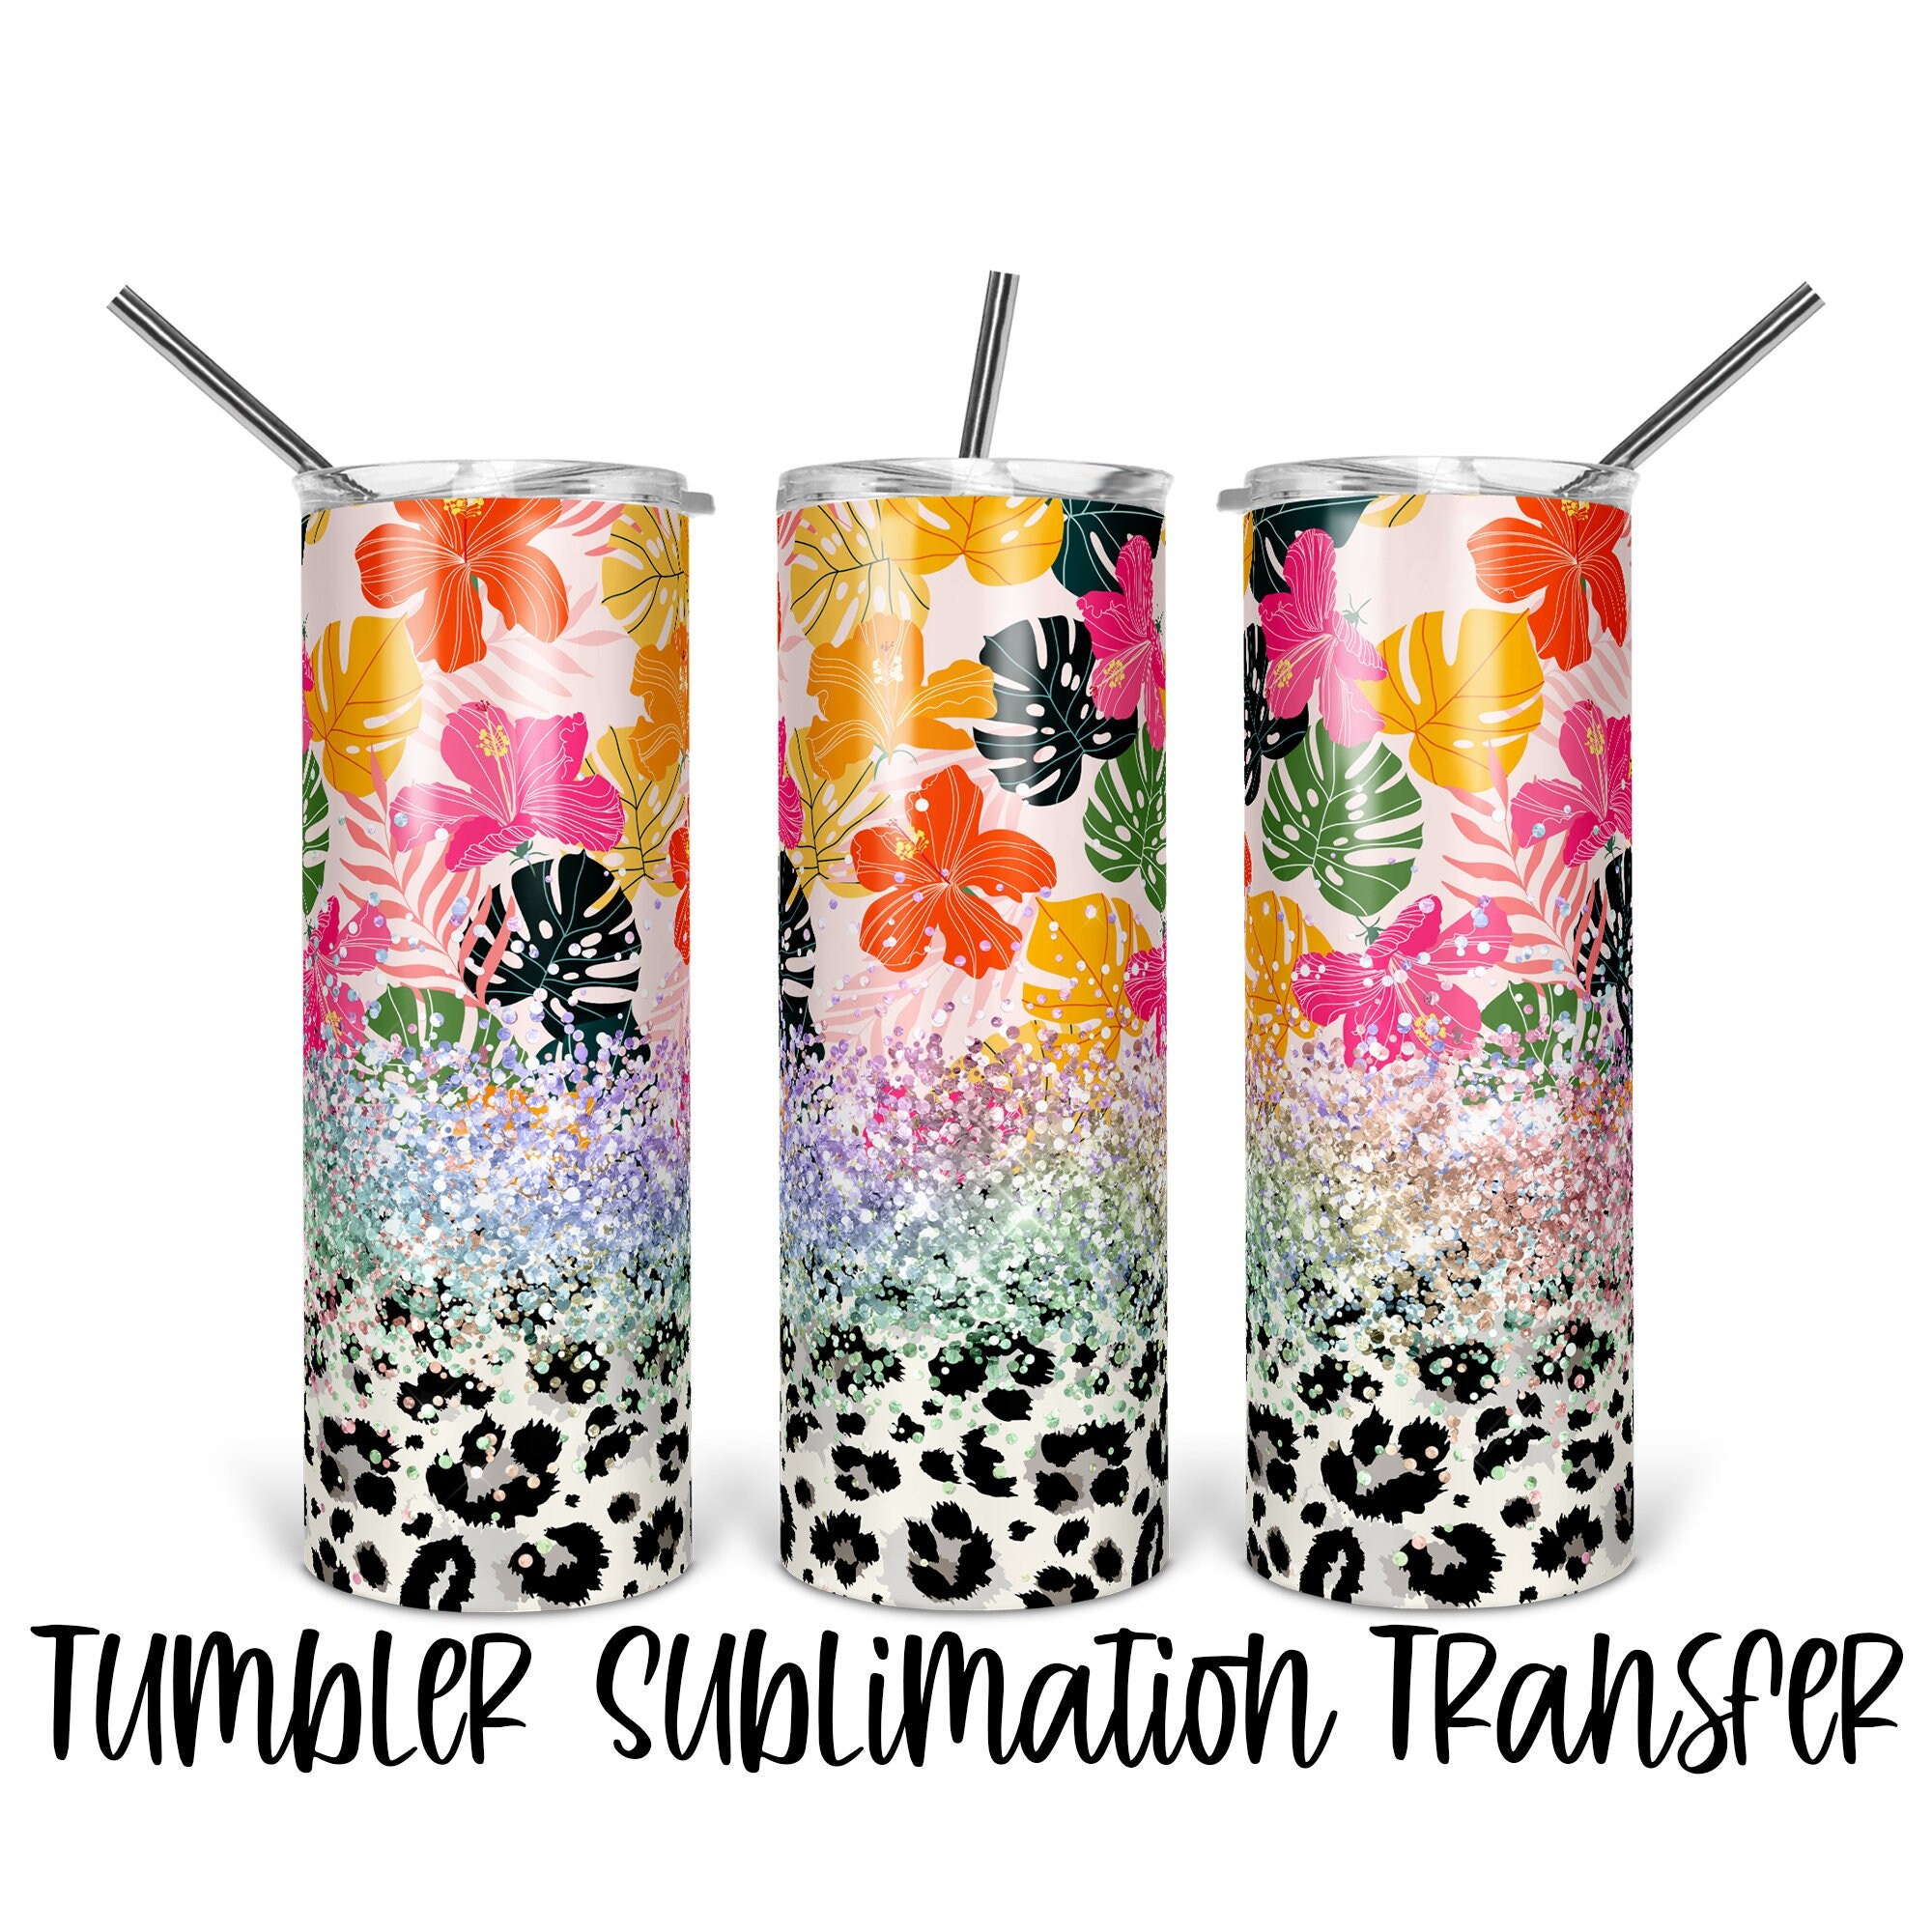 Glitter Leopard Tumbler Sublimation Transfer ready to Press 